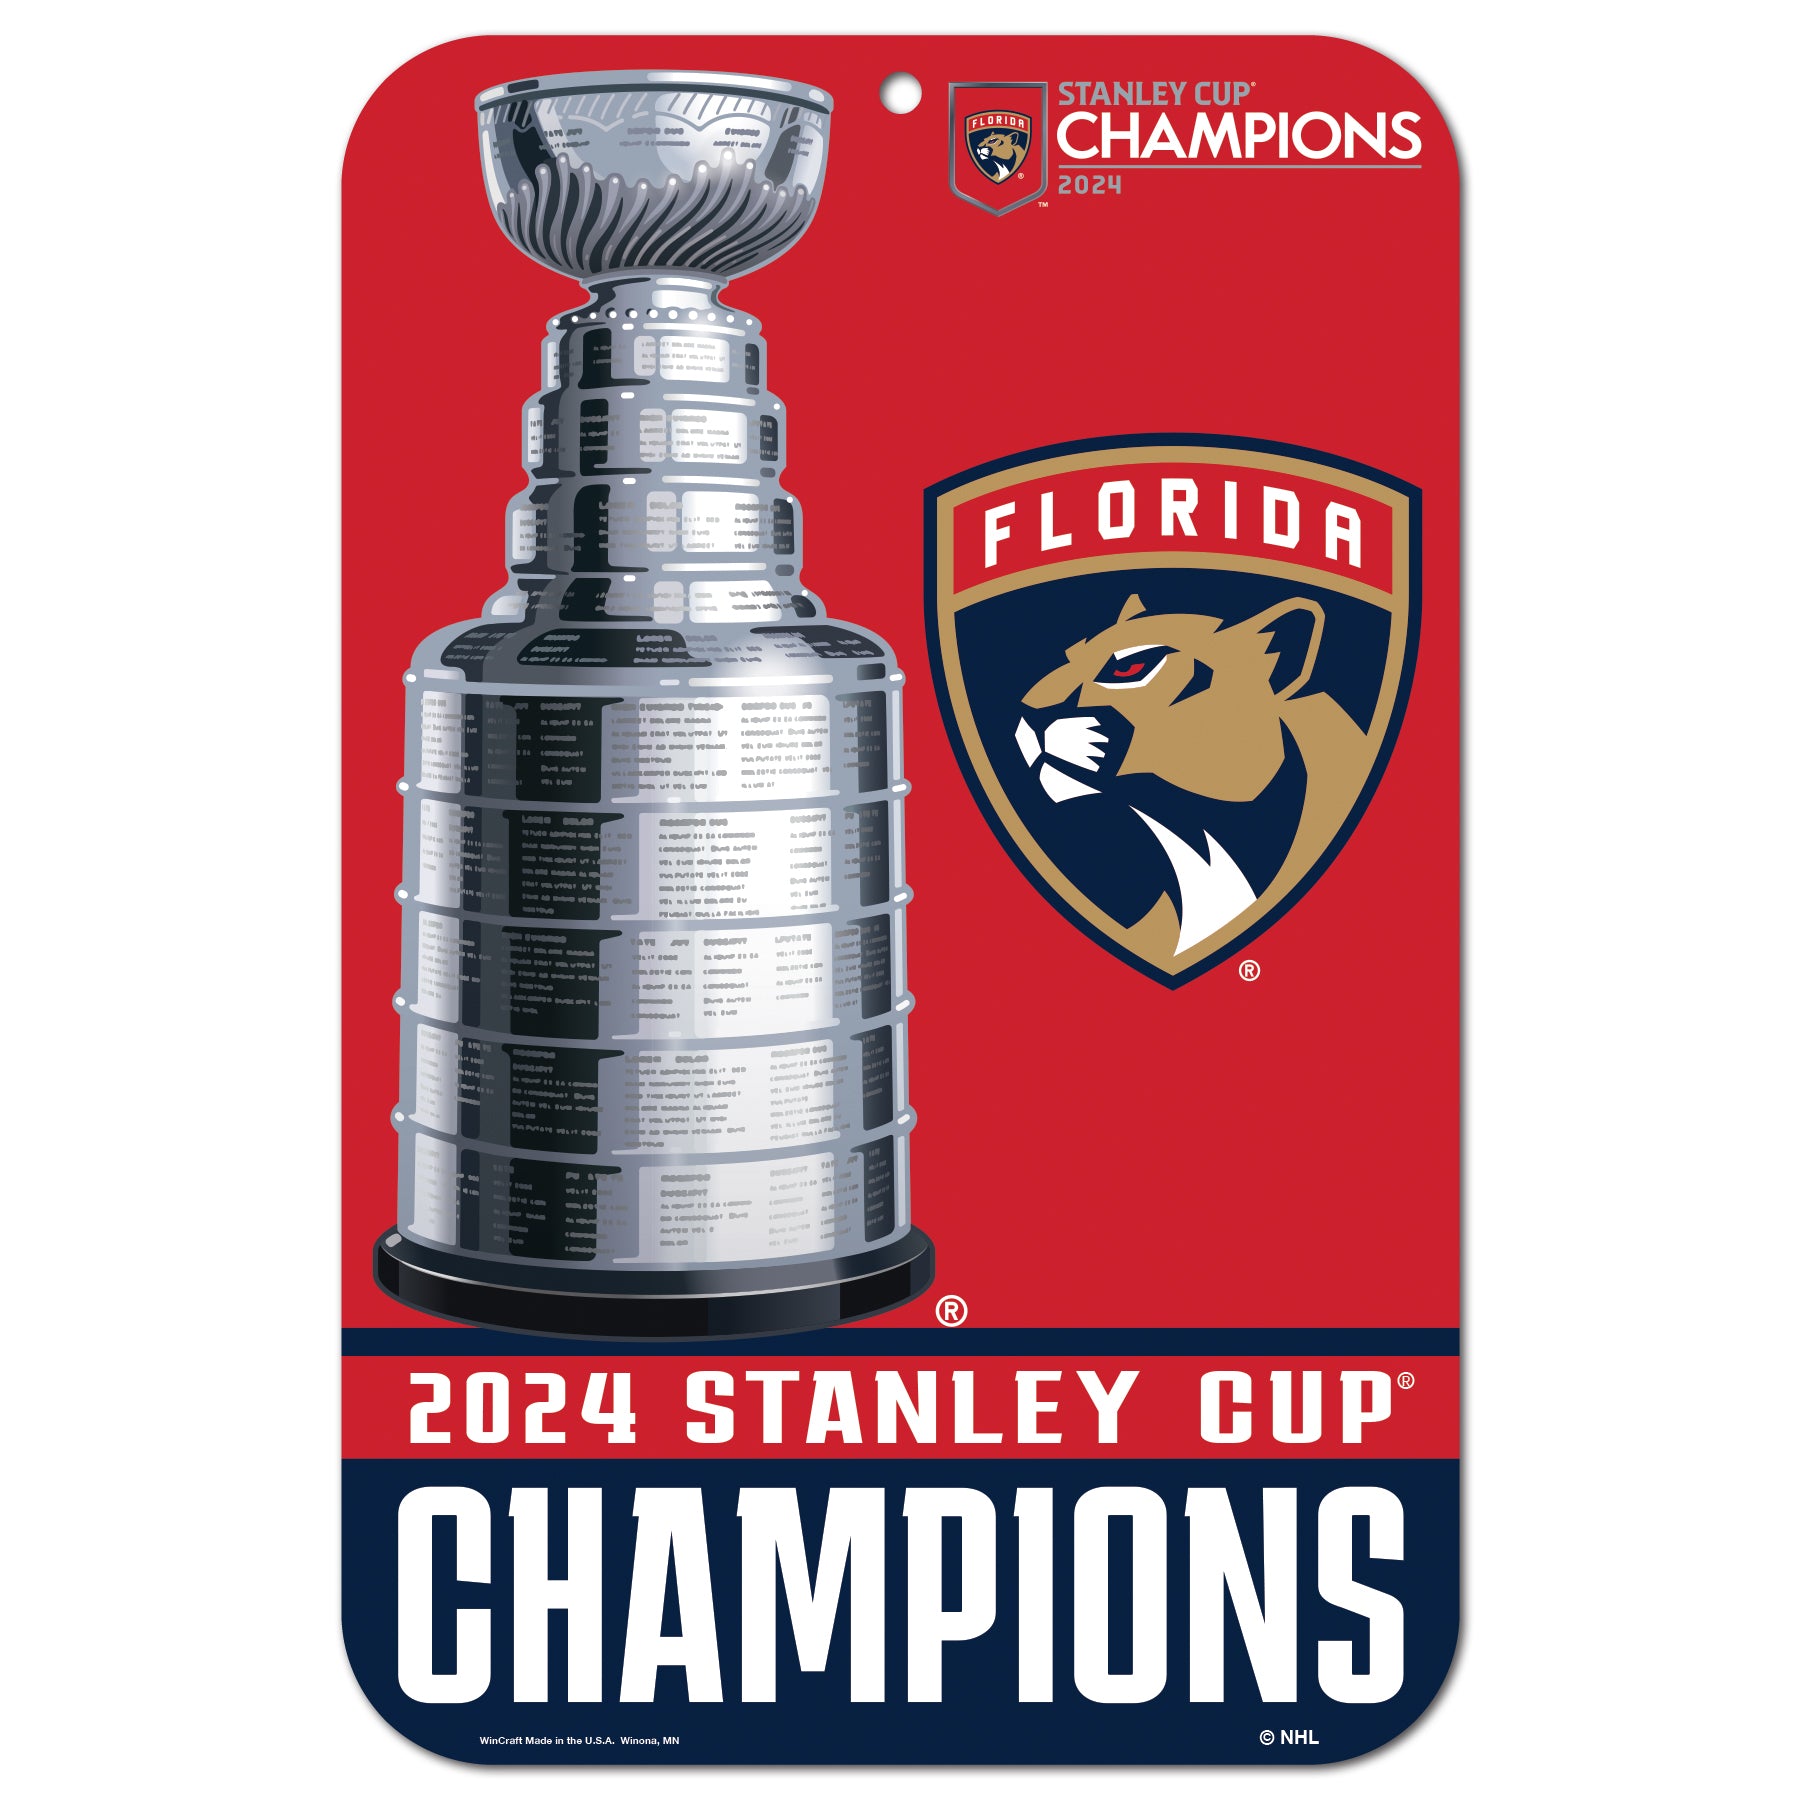 Florida Panthers 2024 Stanley Cup Champions Plastic Styrene Sign - 11 x 17